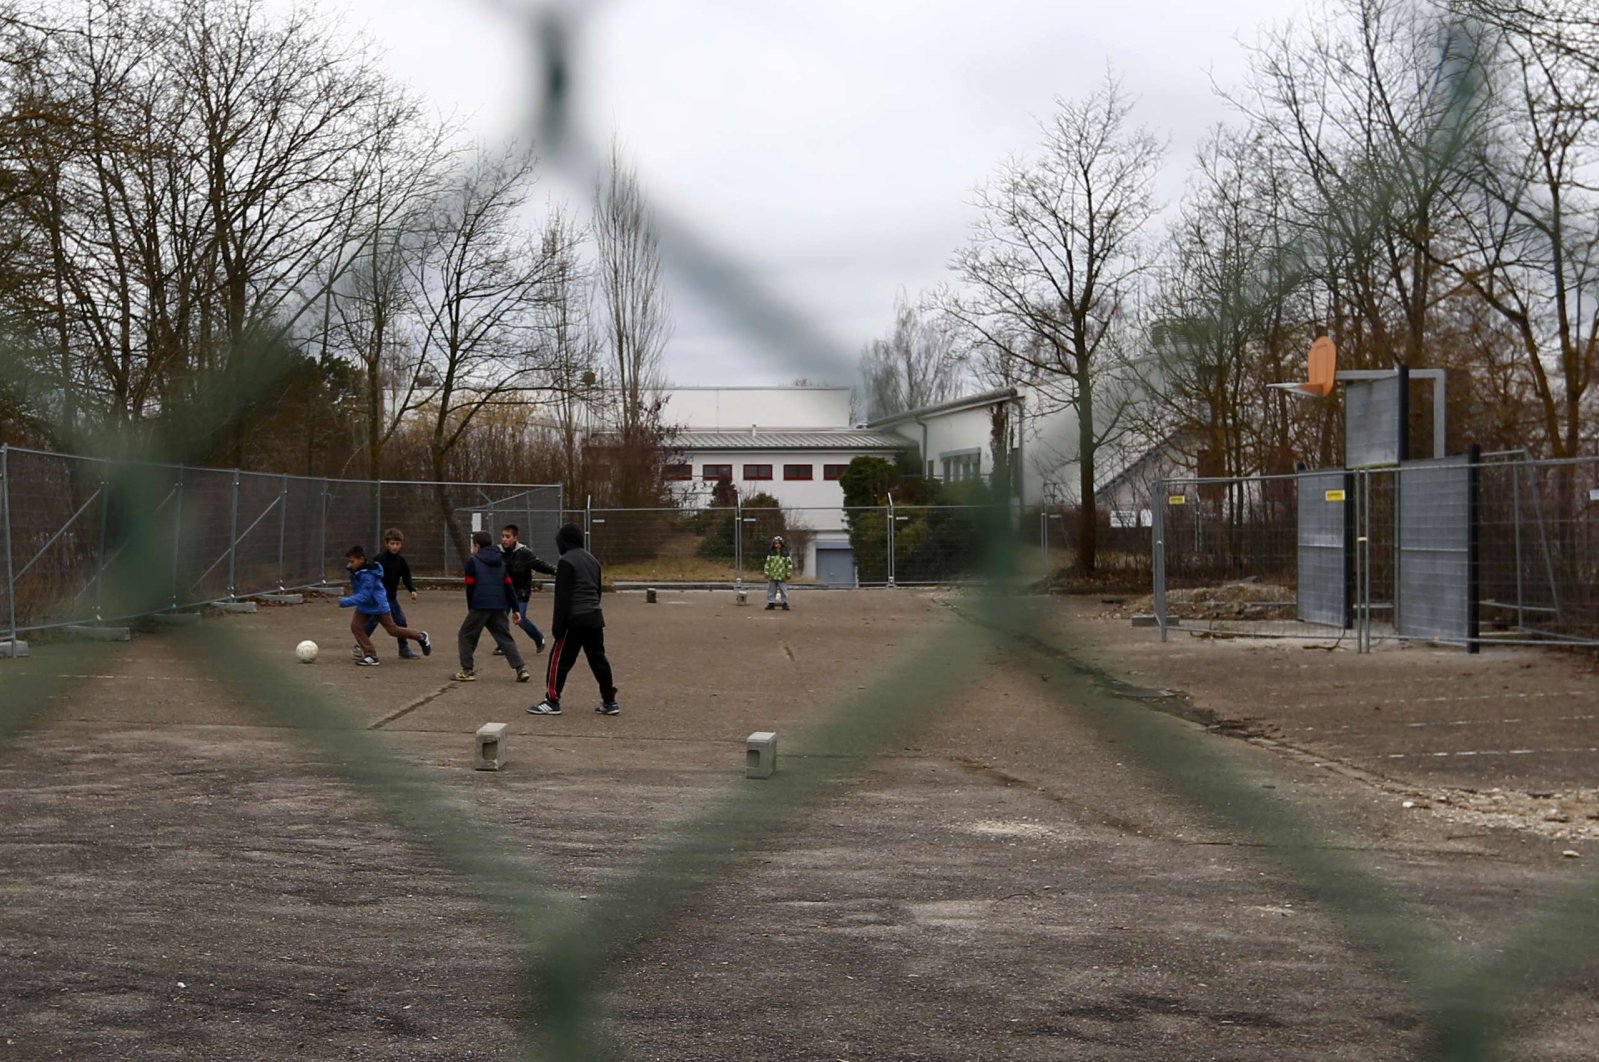 Children of migrants play soccer in a refugee deportation registry center in Manching near Ingolstadt, Germany, Feb. 16, 2016. (Reuters Photo)